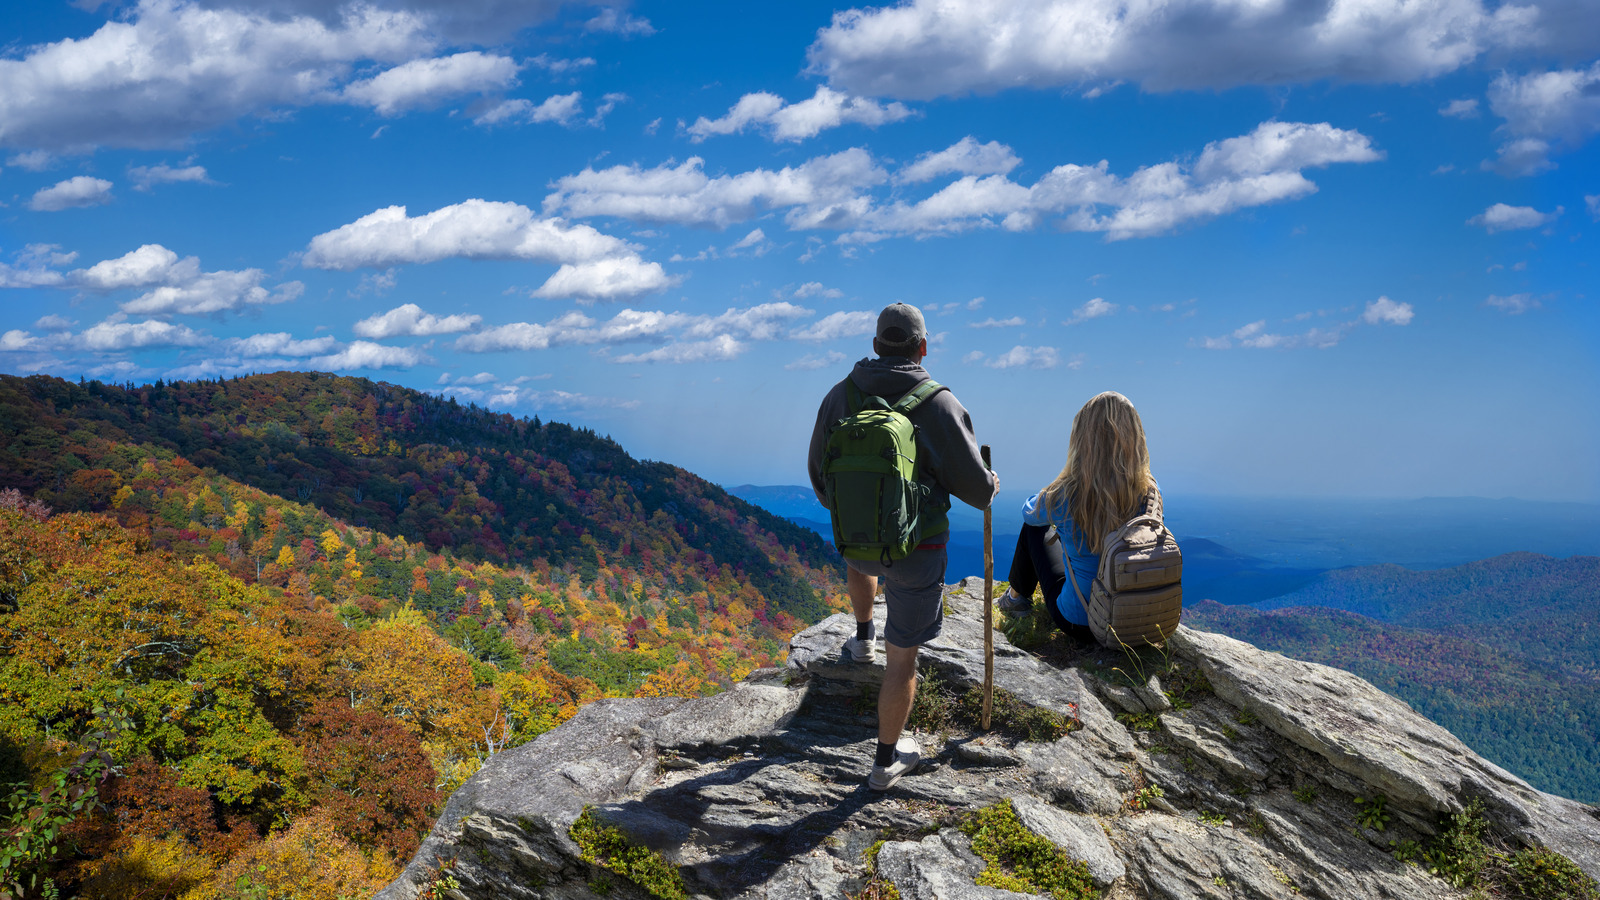 9 Things You Should Pack When You Go Hiking in the Smoky Mountains